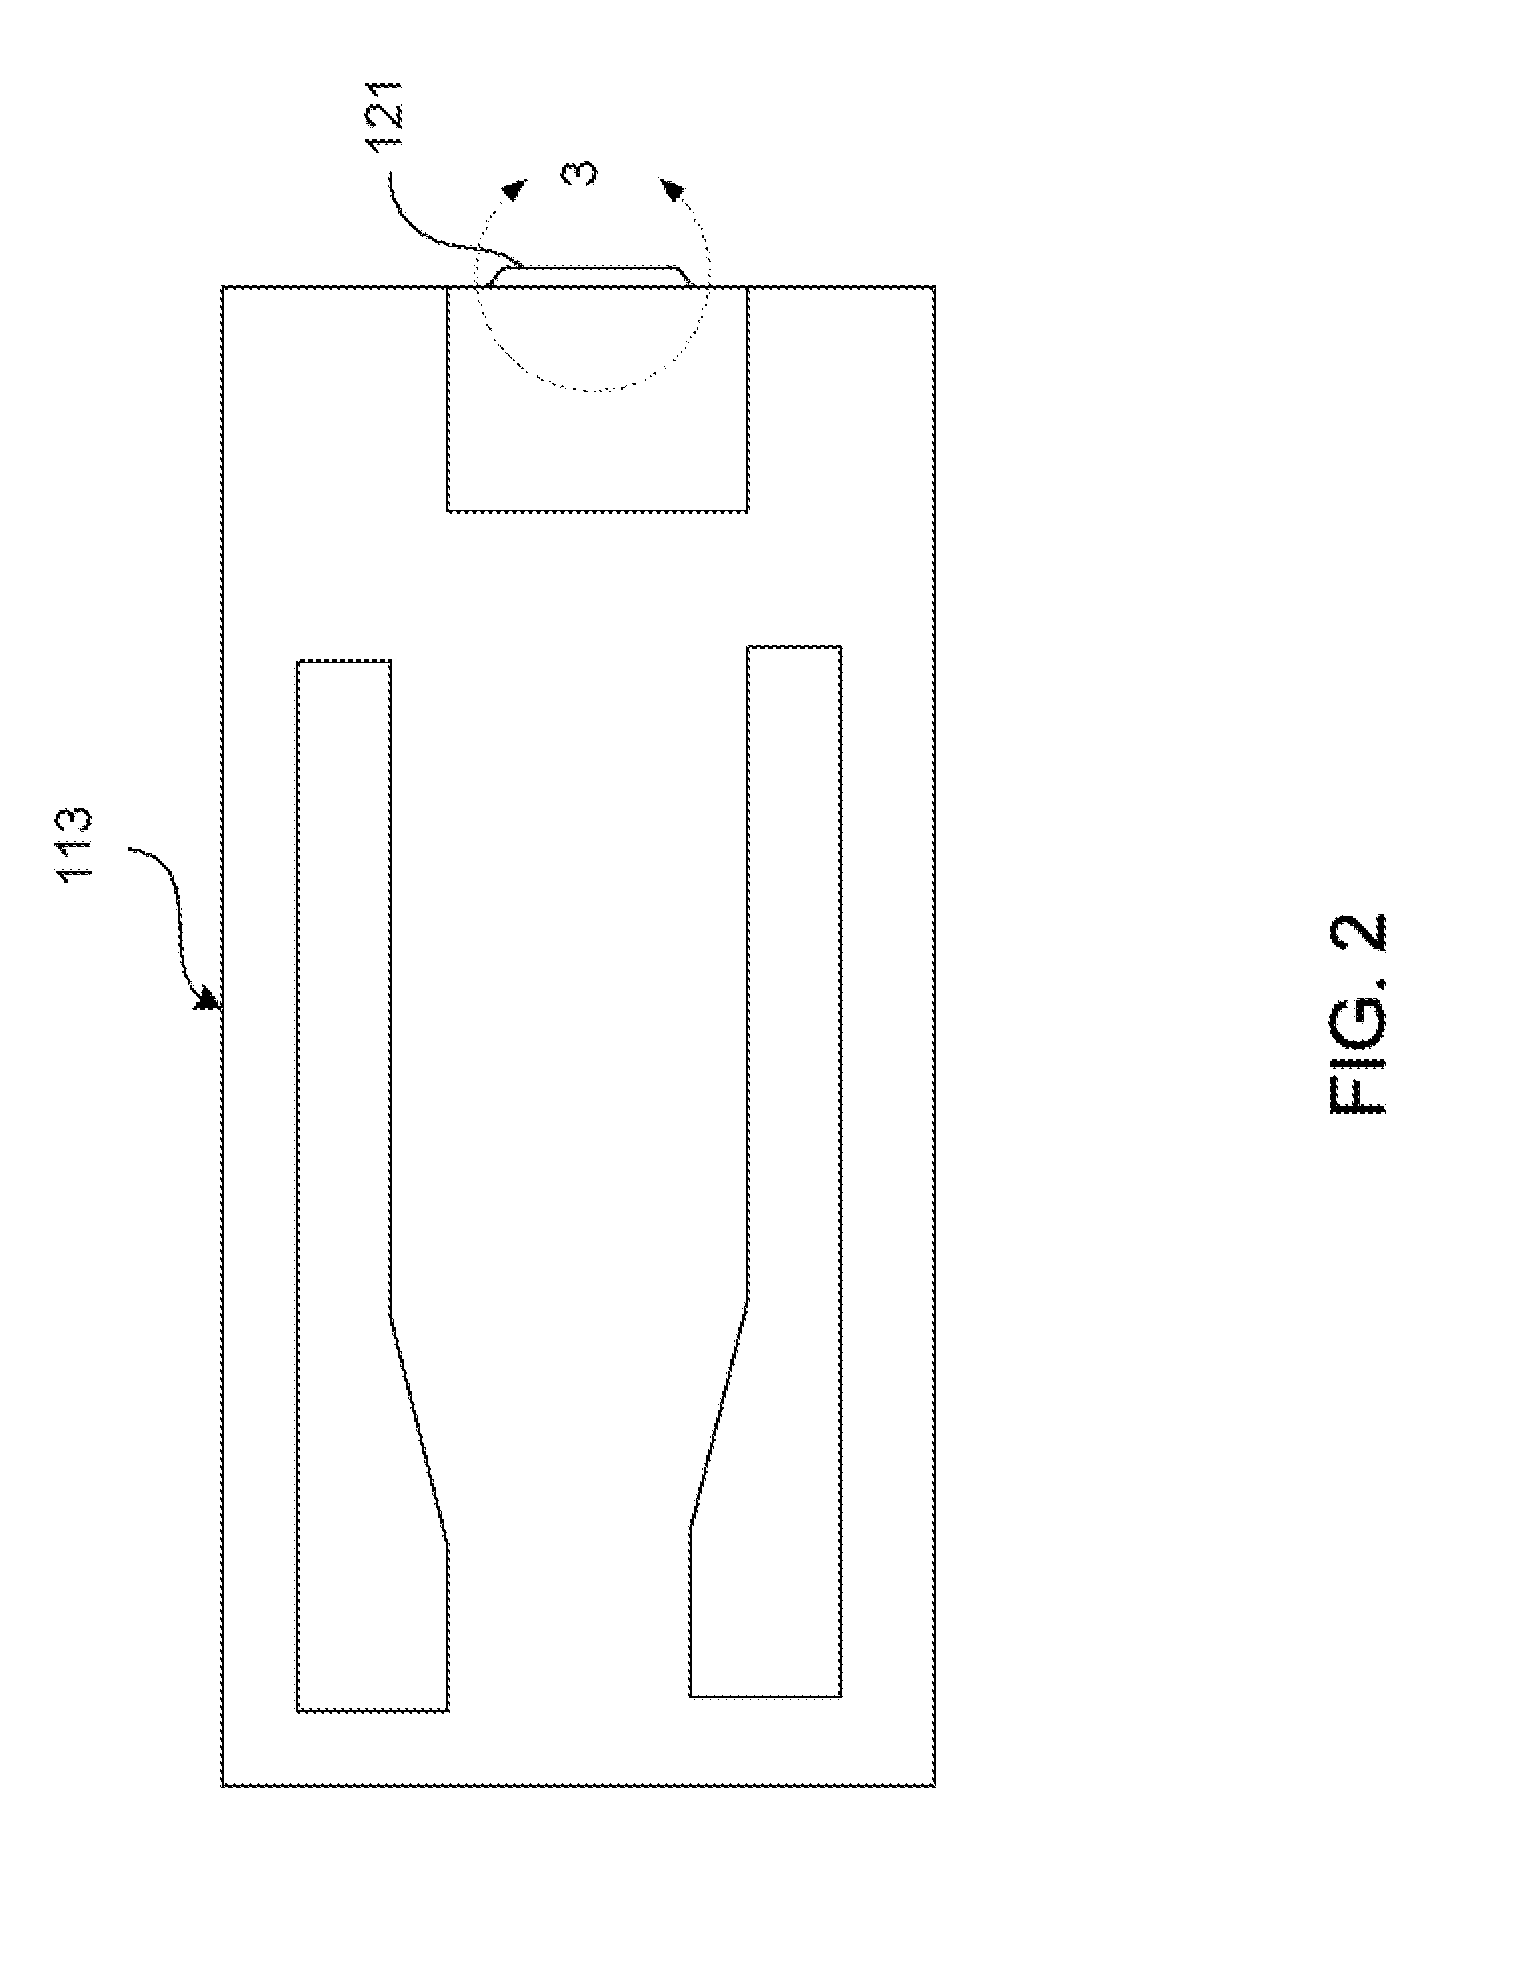 Magnetoresistive sensor having a hard bias buffer layer, seed layer structure providing exceptionally high magnetic orientation ratio